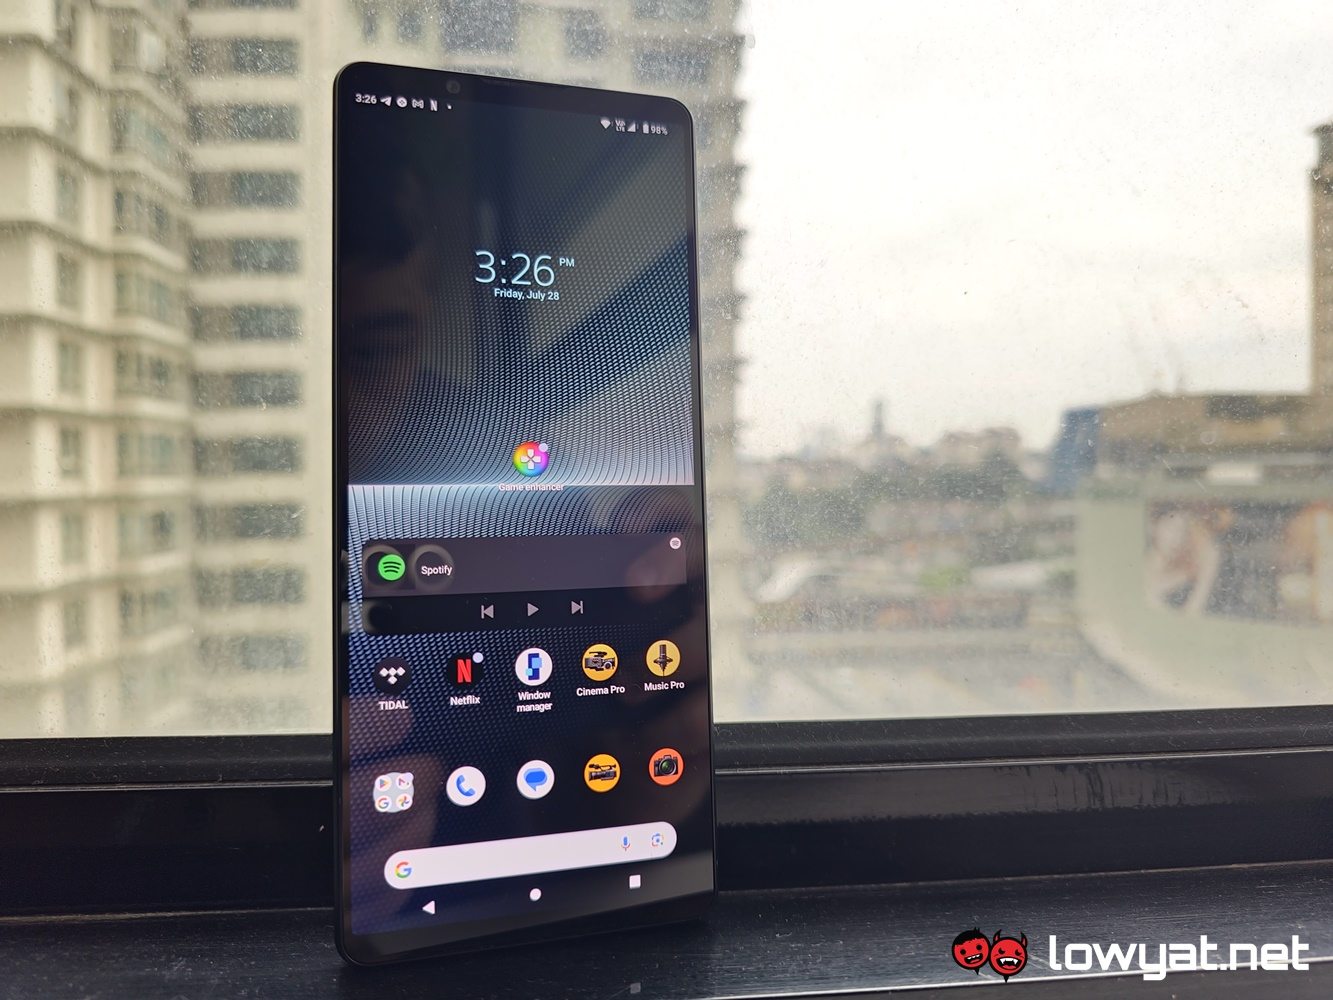 Sony Xperia 1 V review: One for smartphone pros